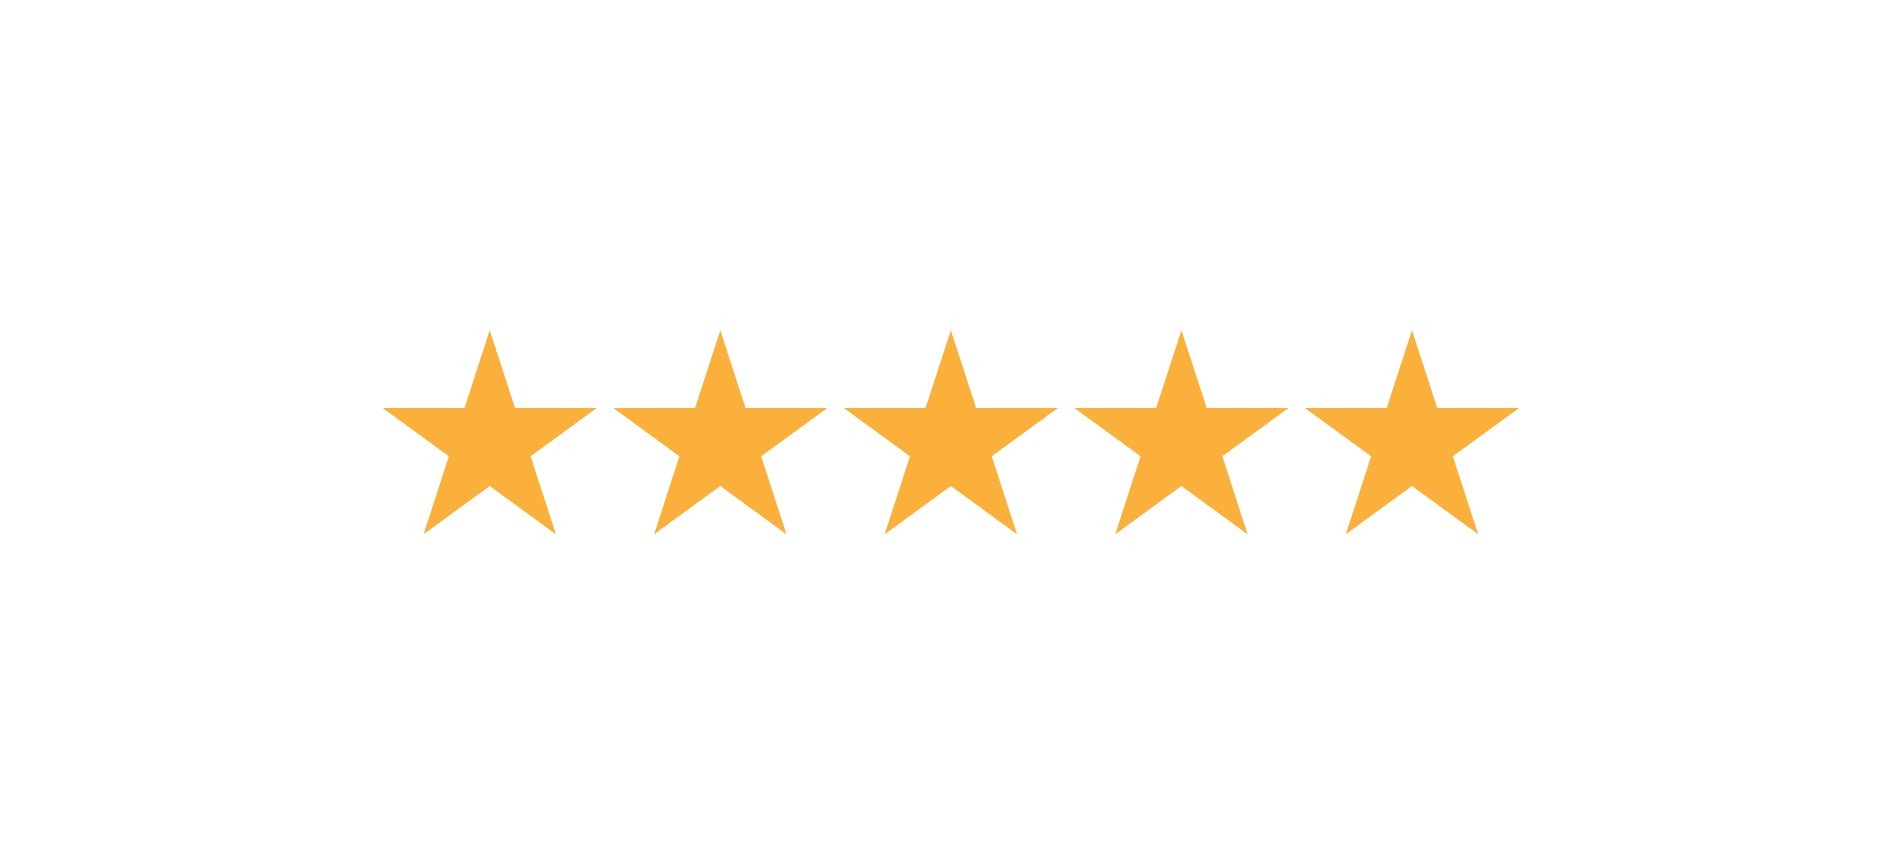 Check out our Google reviews